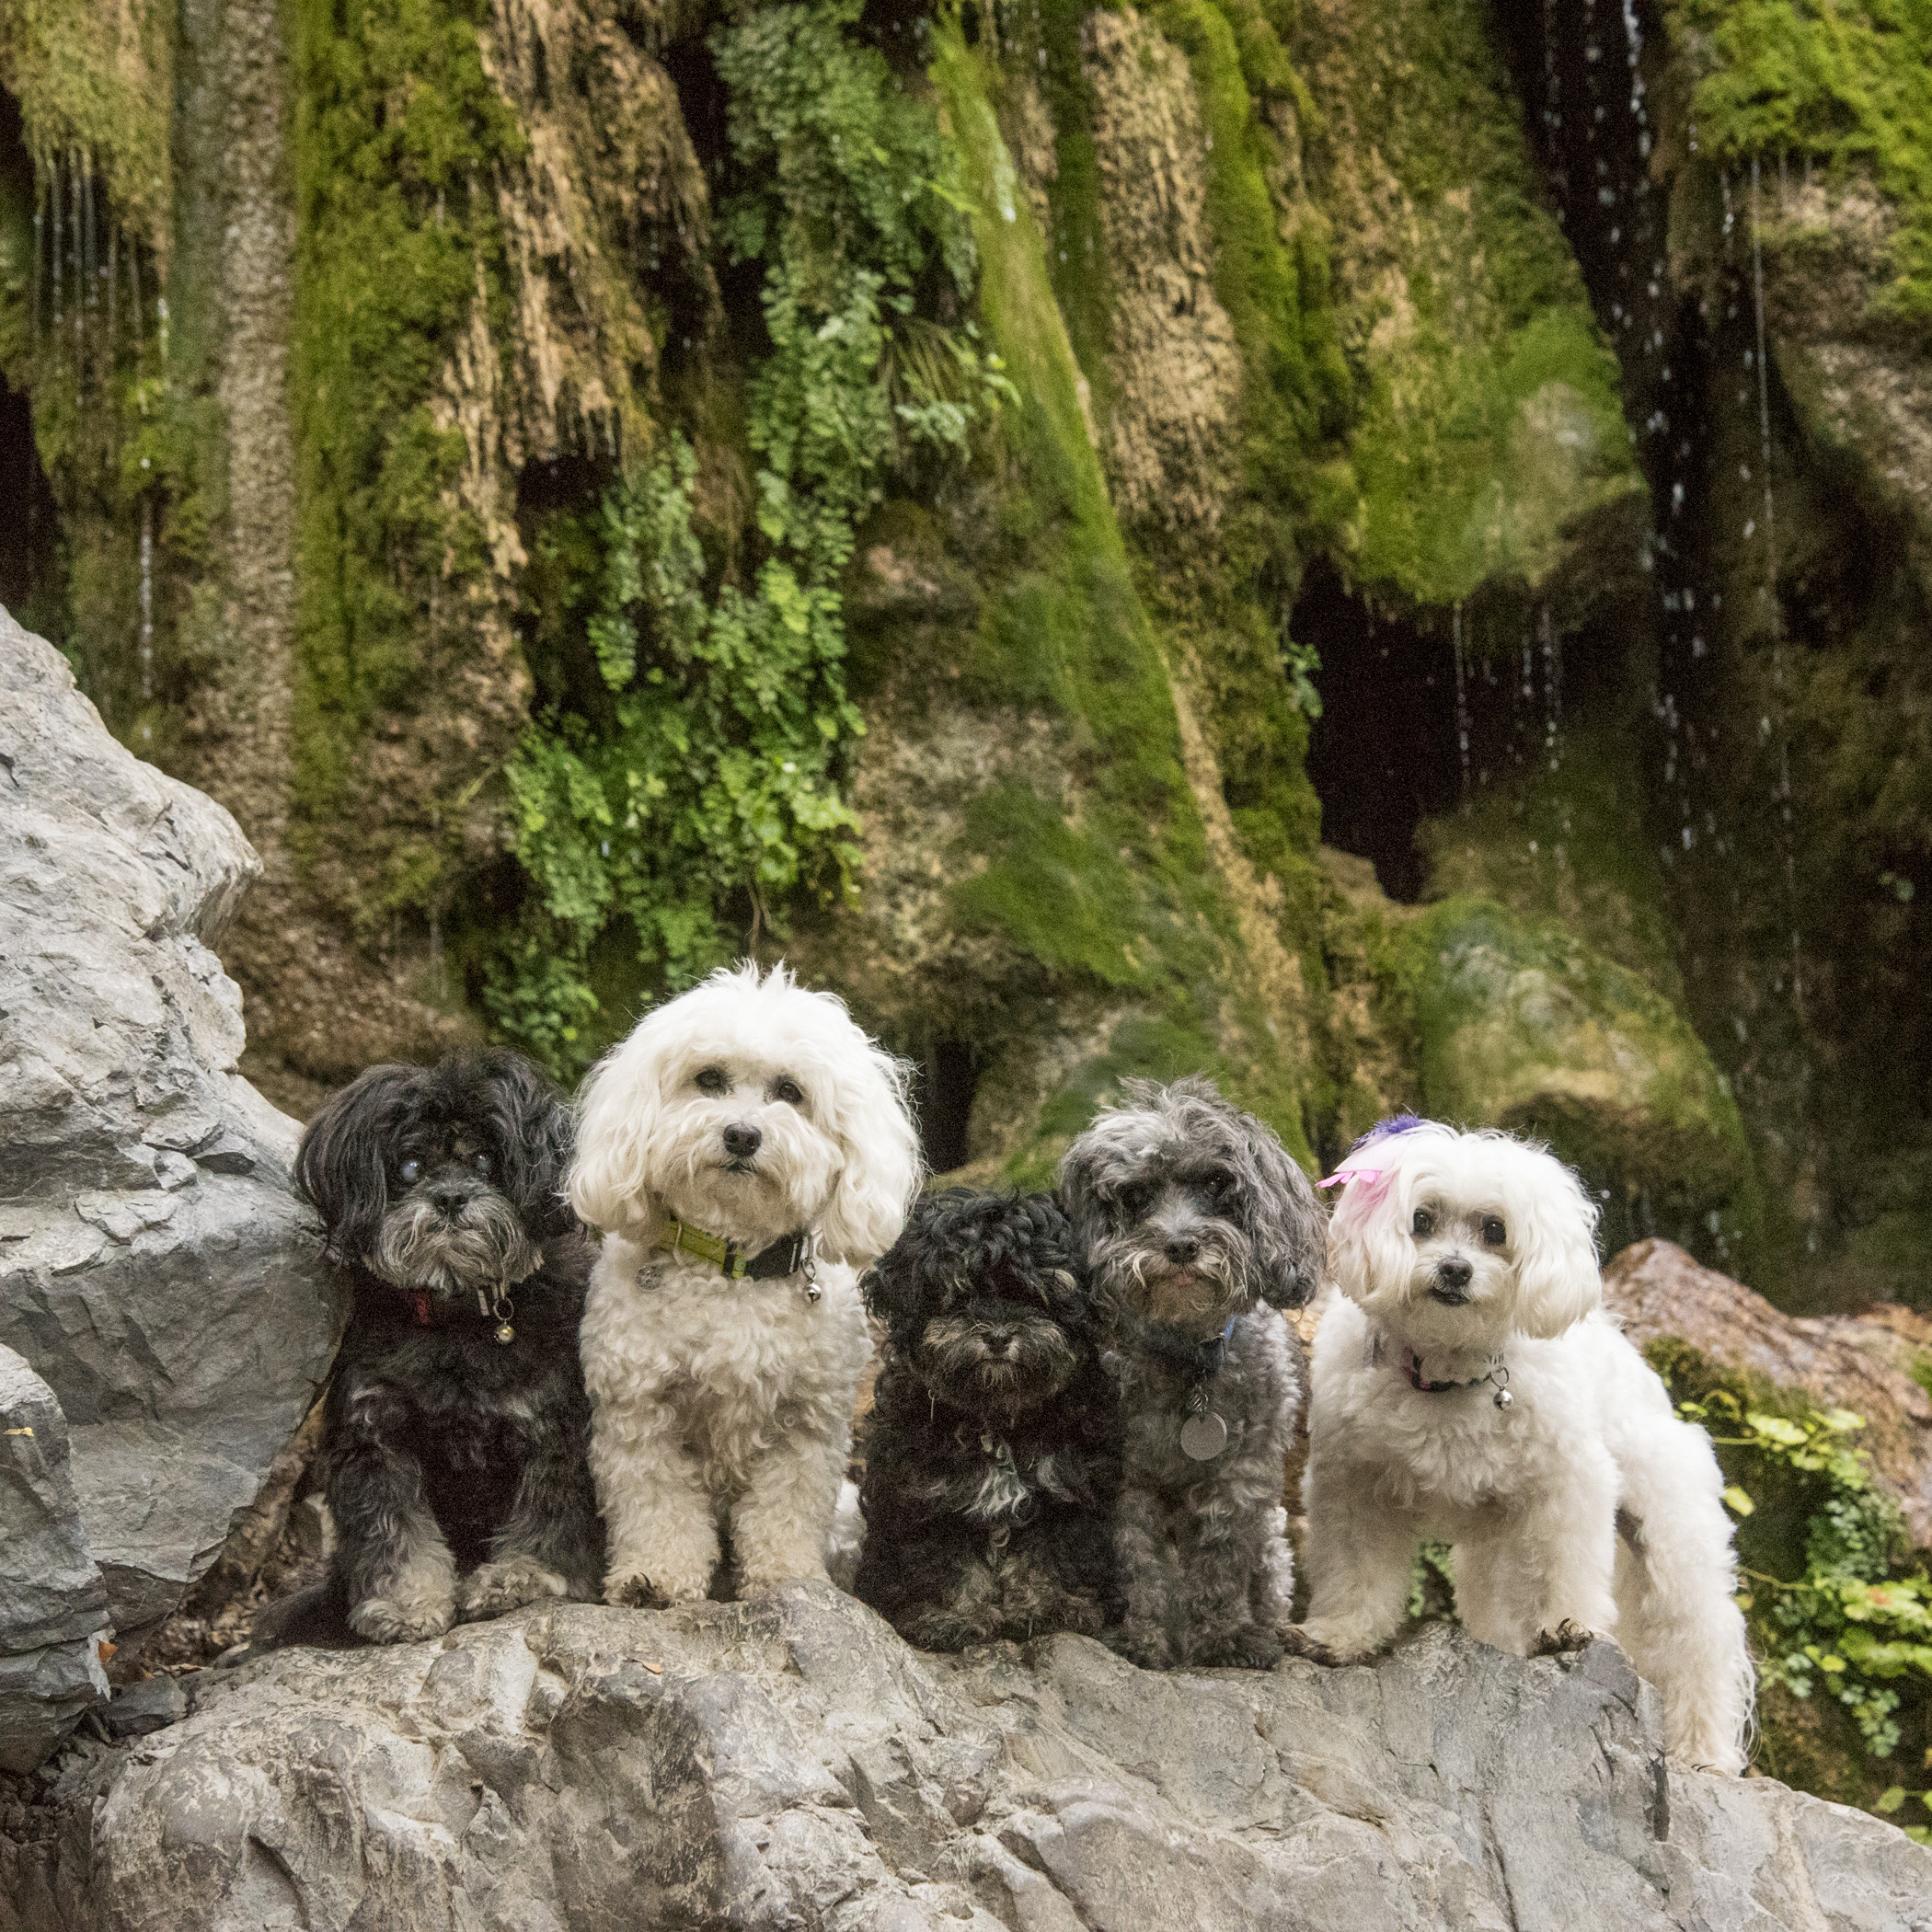  No adventure would be complete without a posed group photo at the falls. 